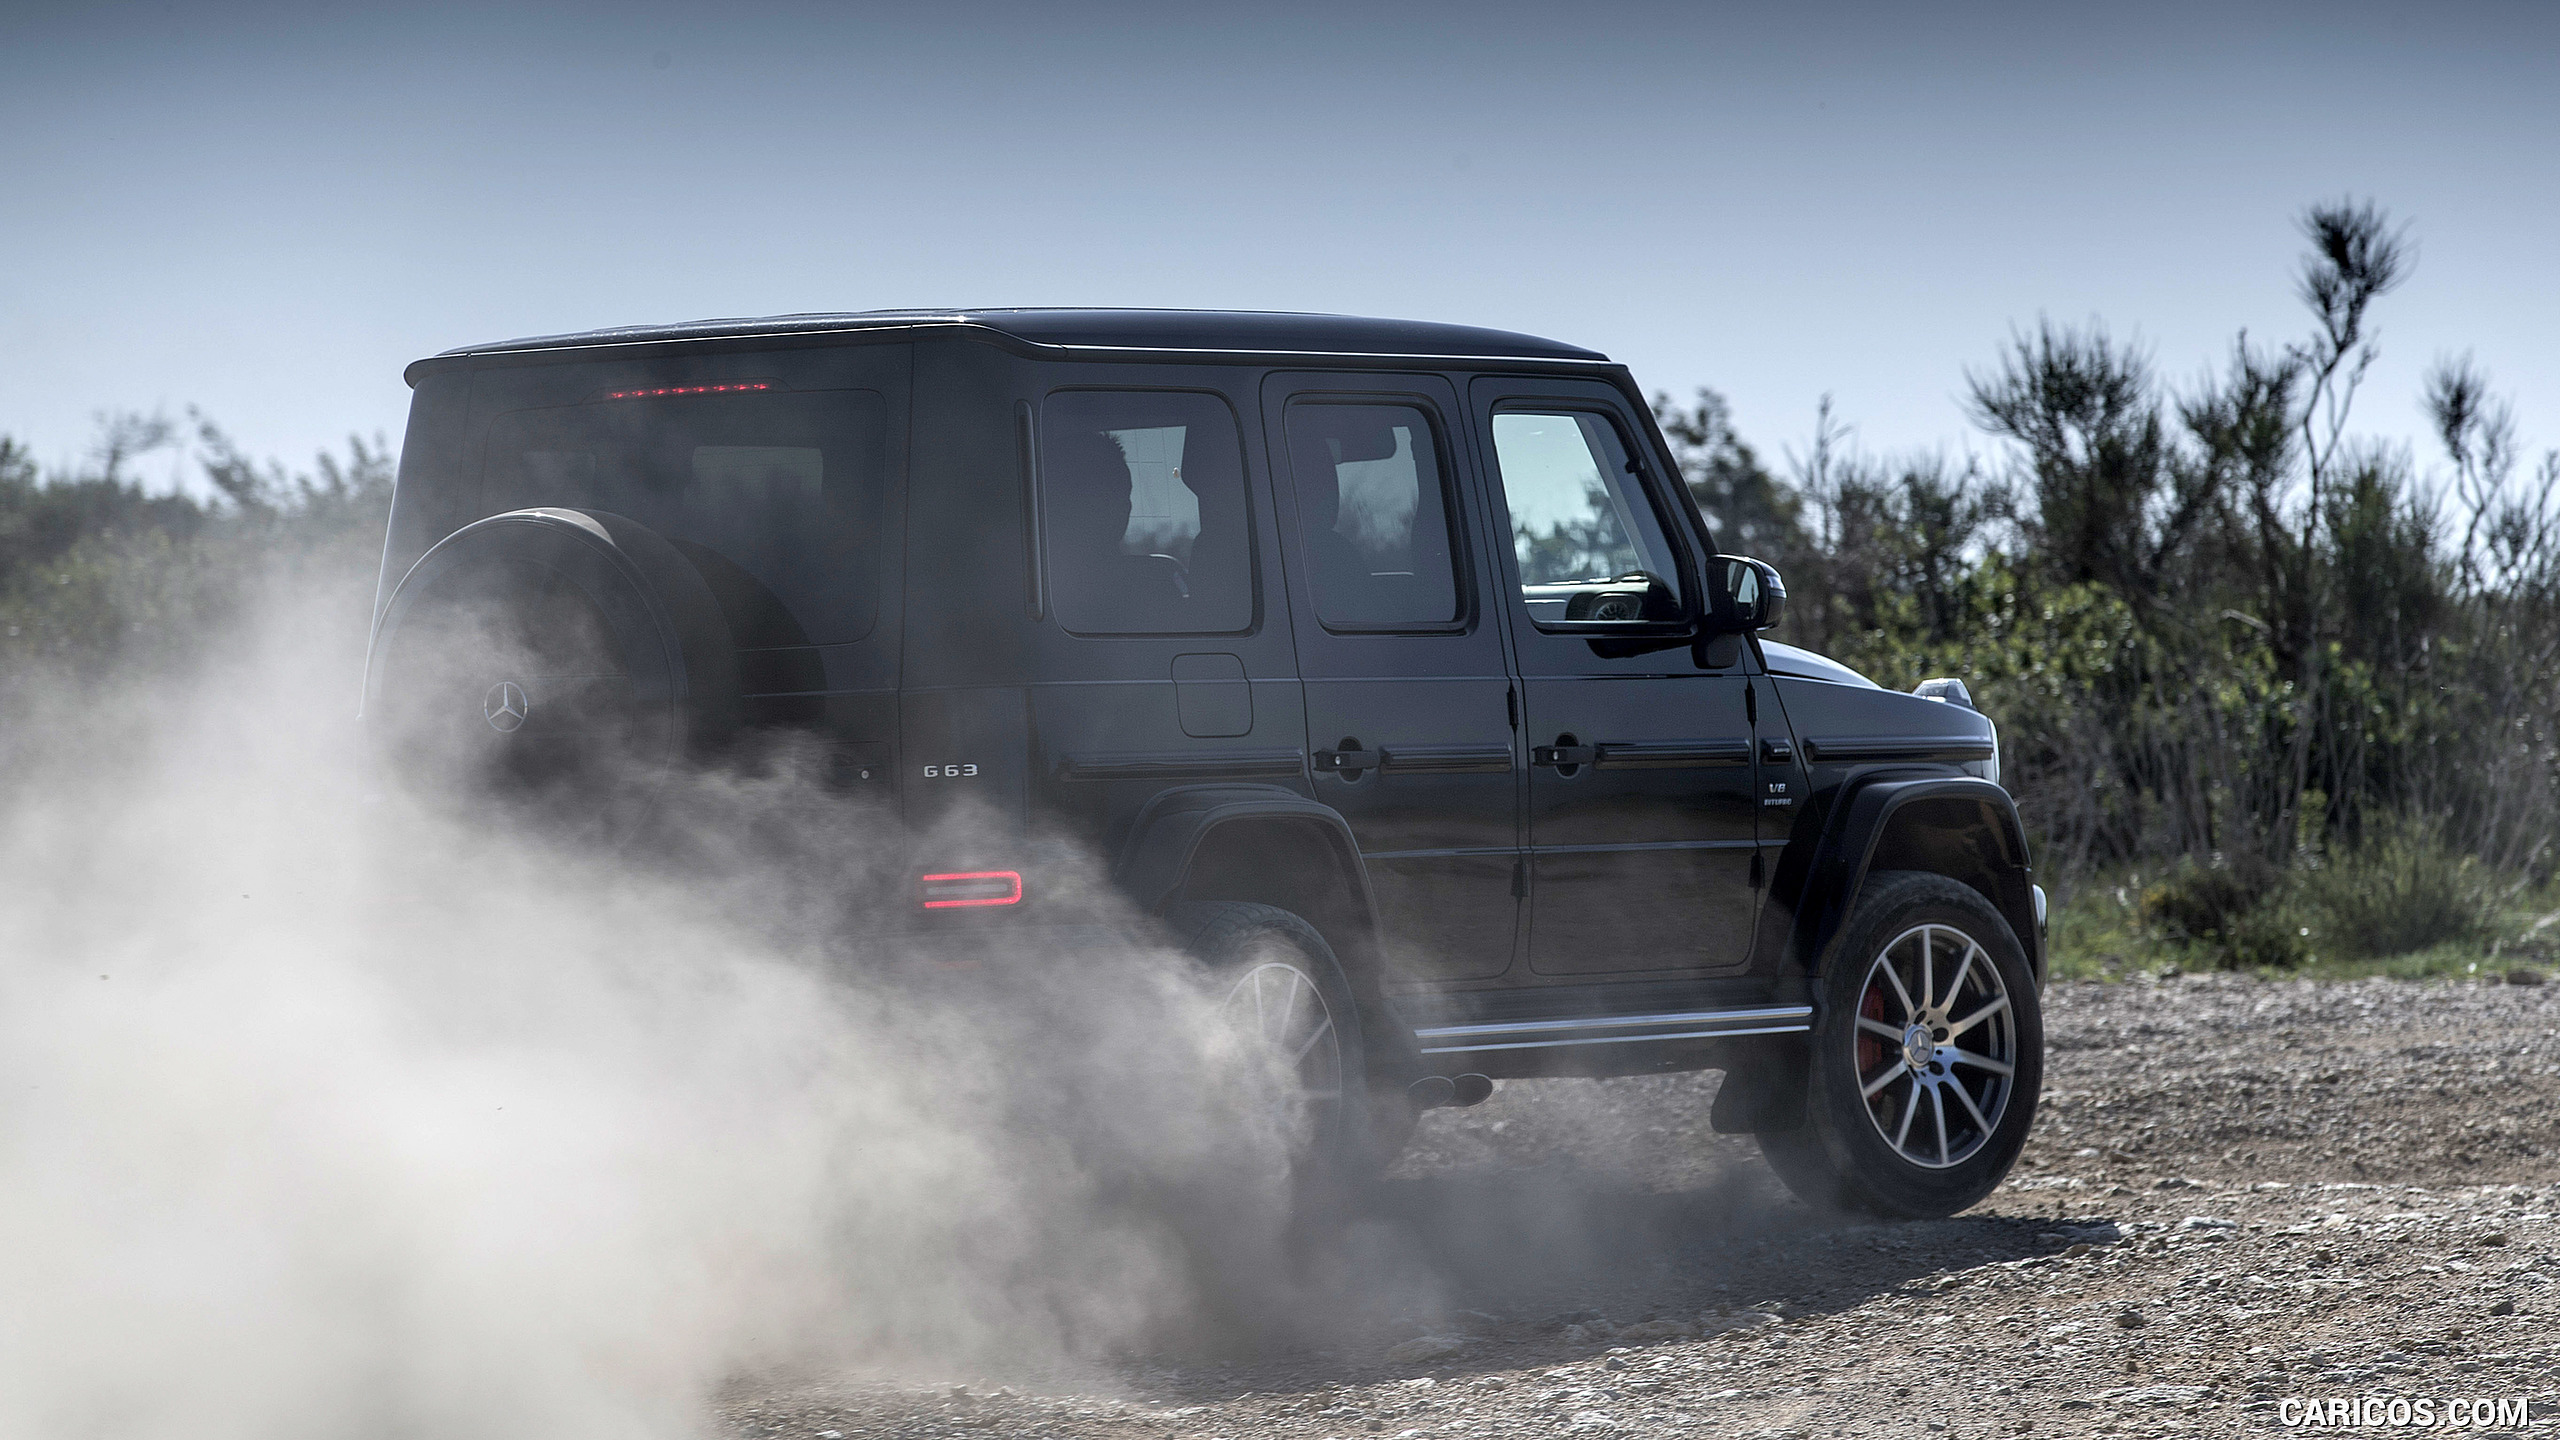 2019 Mercedes-AMG G63 - Off-Road, #256 of 452